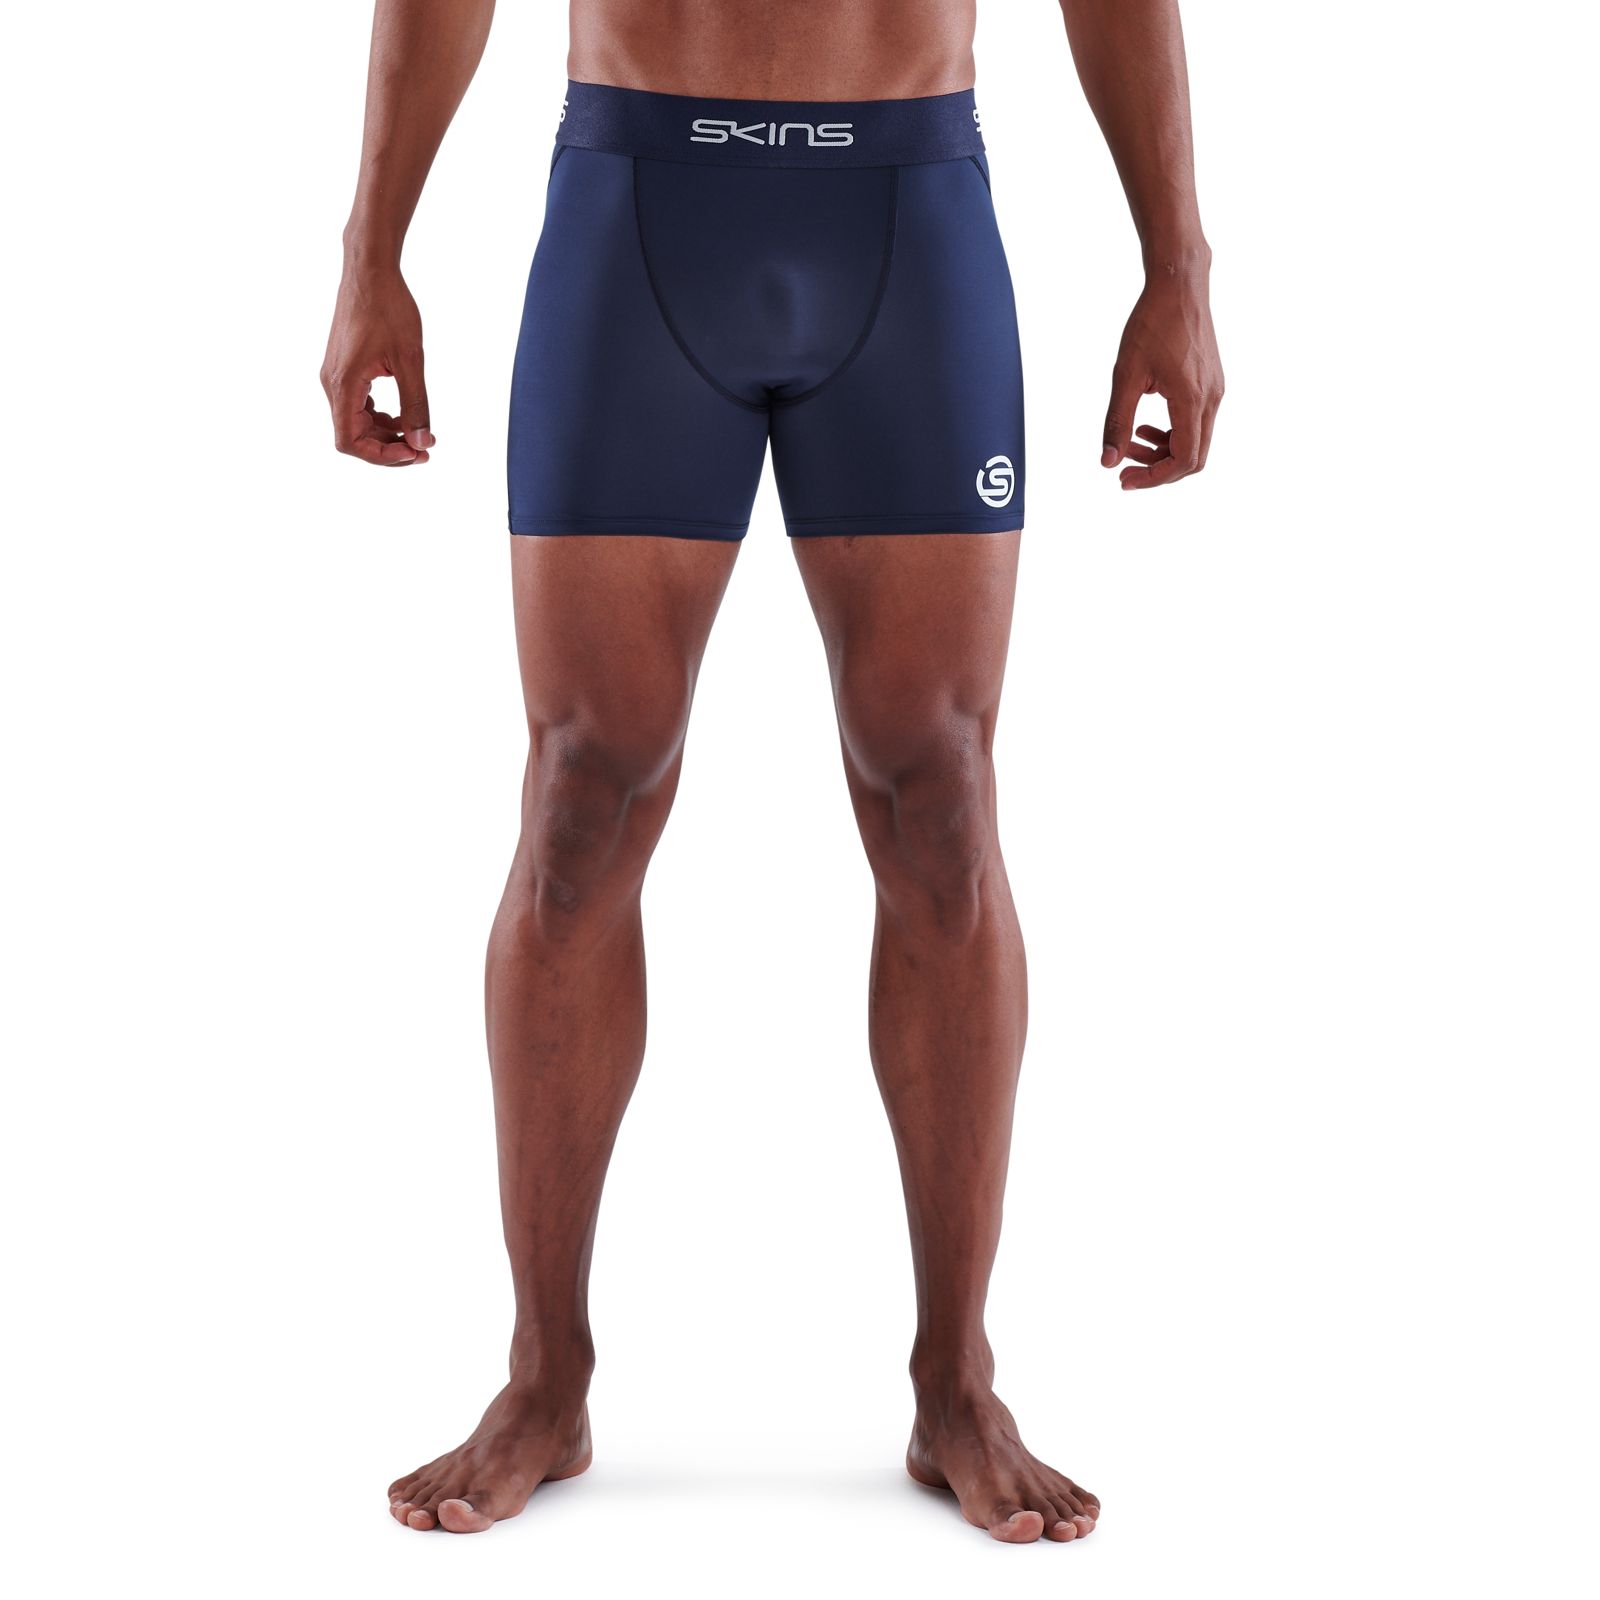 Navy Blue Workout Shorts with Compression Pants - Men's Sportswear